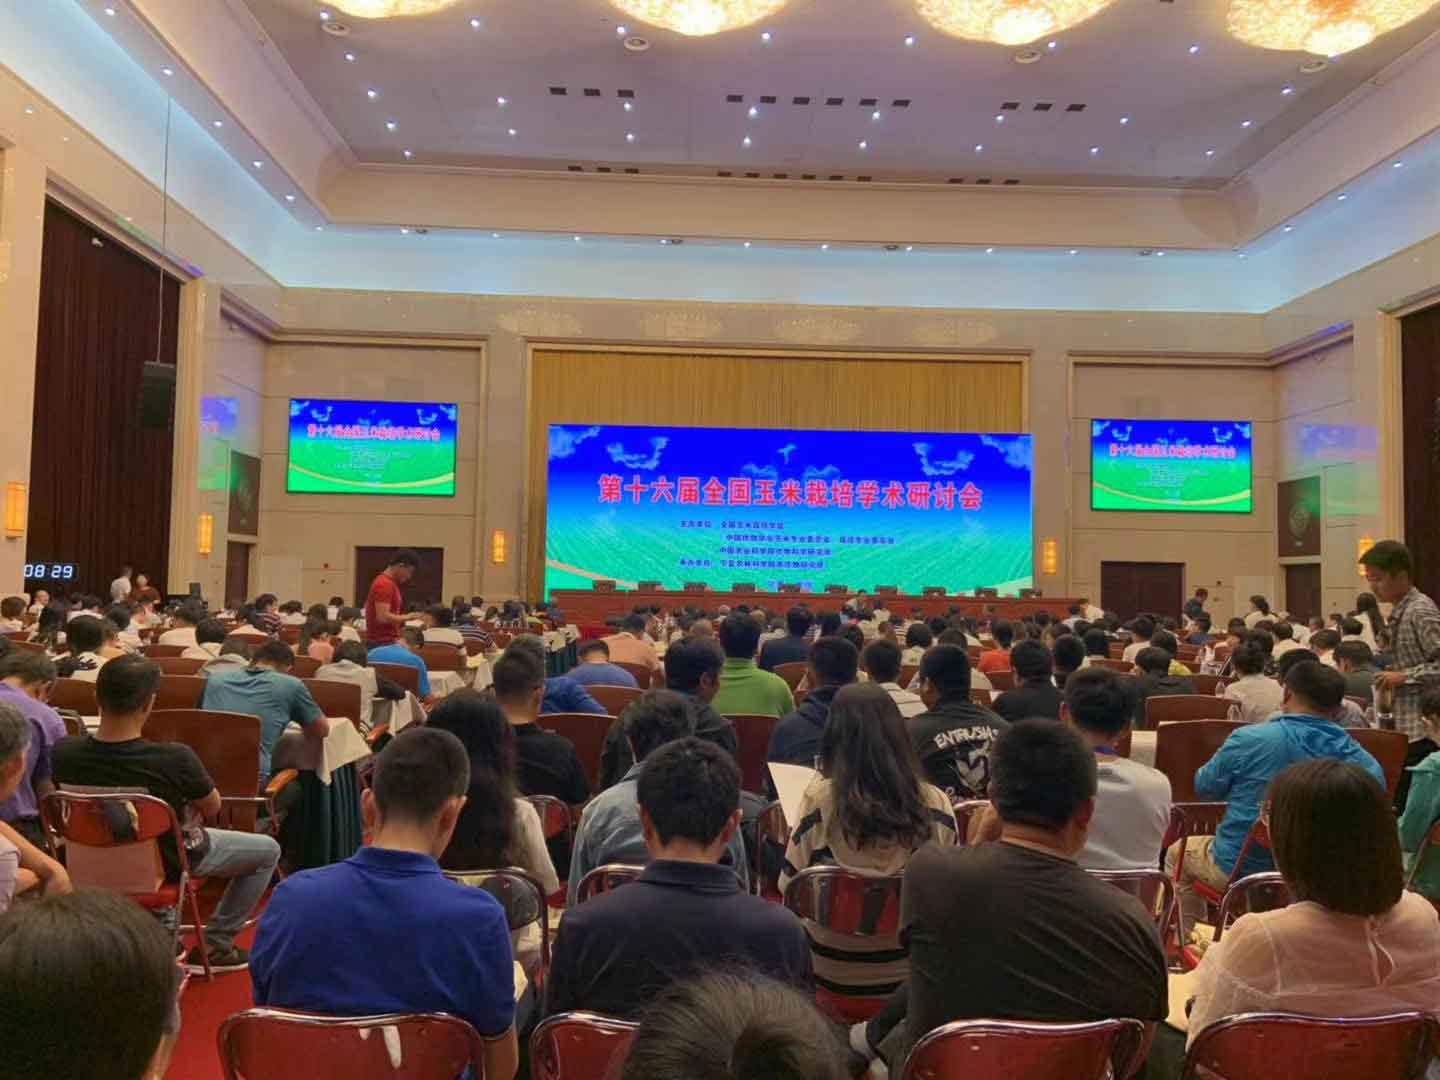 LICA attended the 16th National Corn Cultivation Symposium